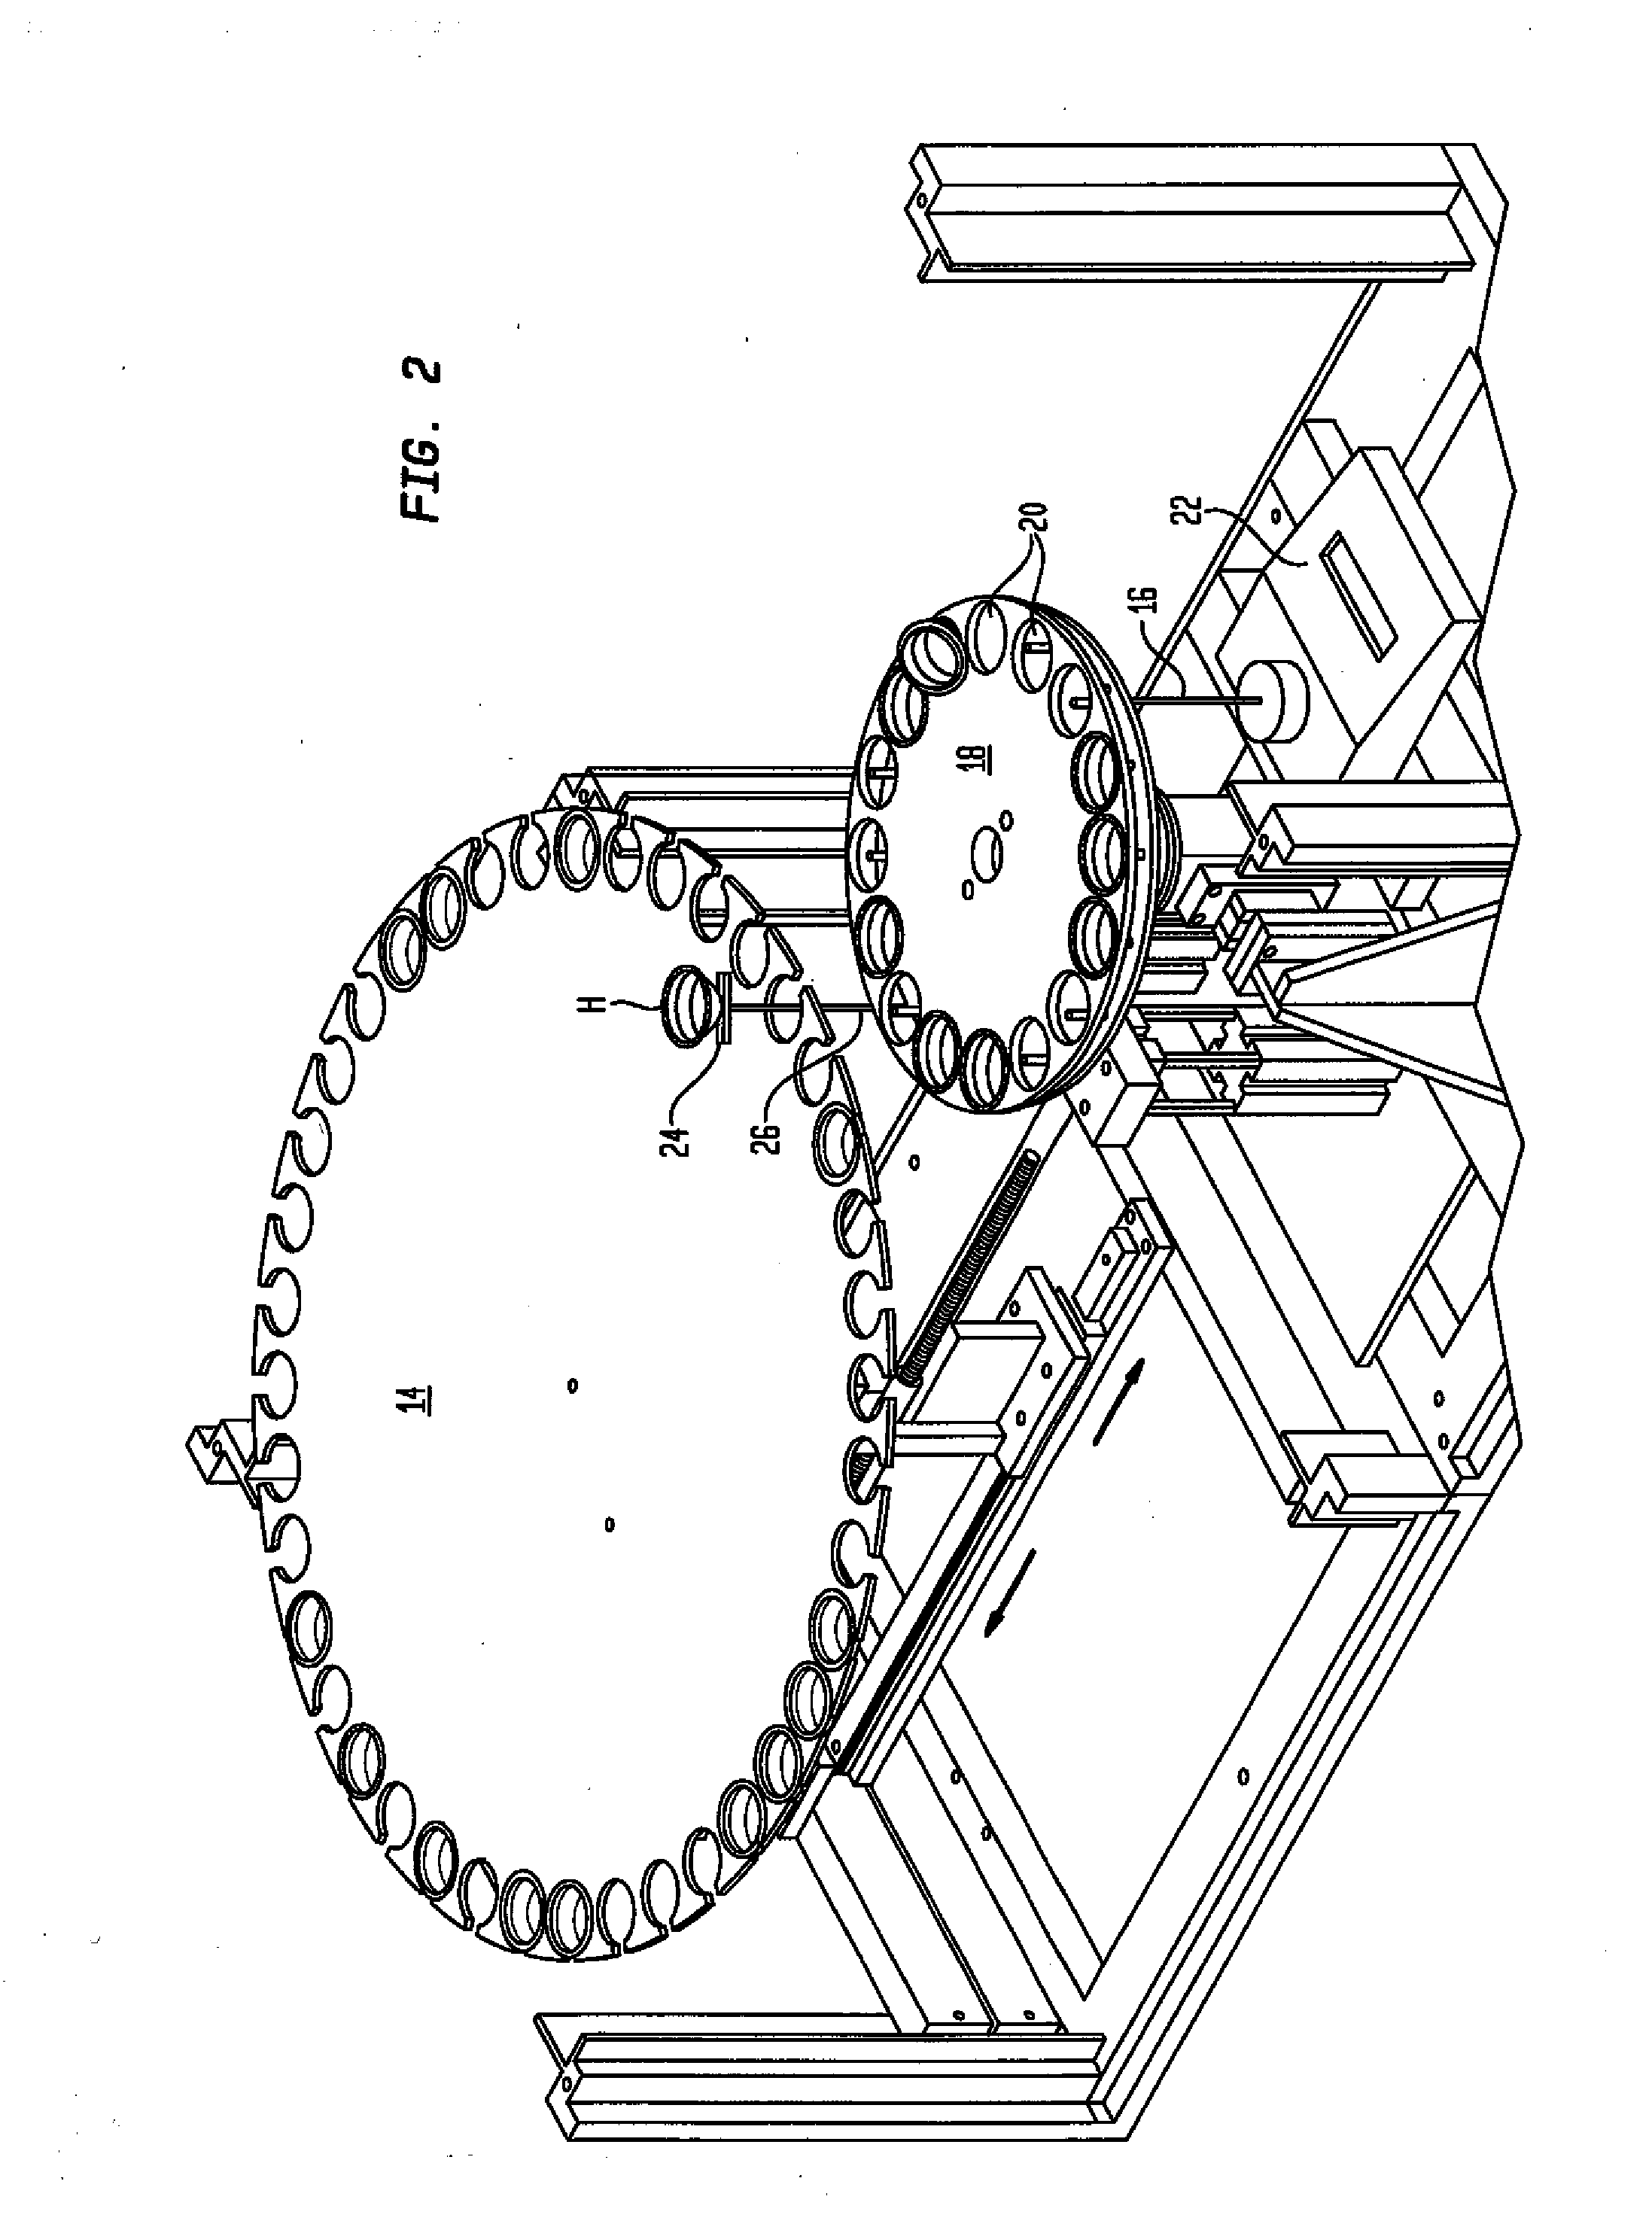 Method and apparatus for multiple sample preparation and simultaneous loss of ignition/gain on ignition analysis, for use in x-ray fluorescence spectrometry